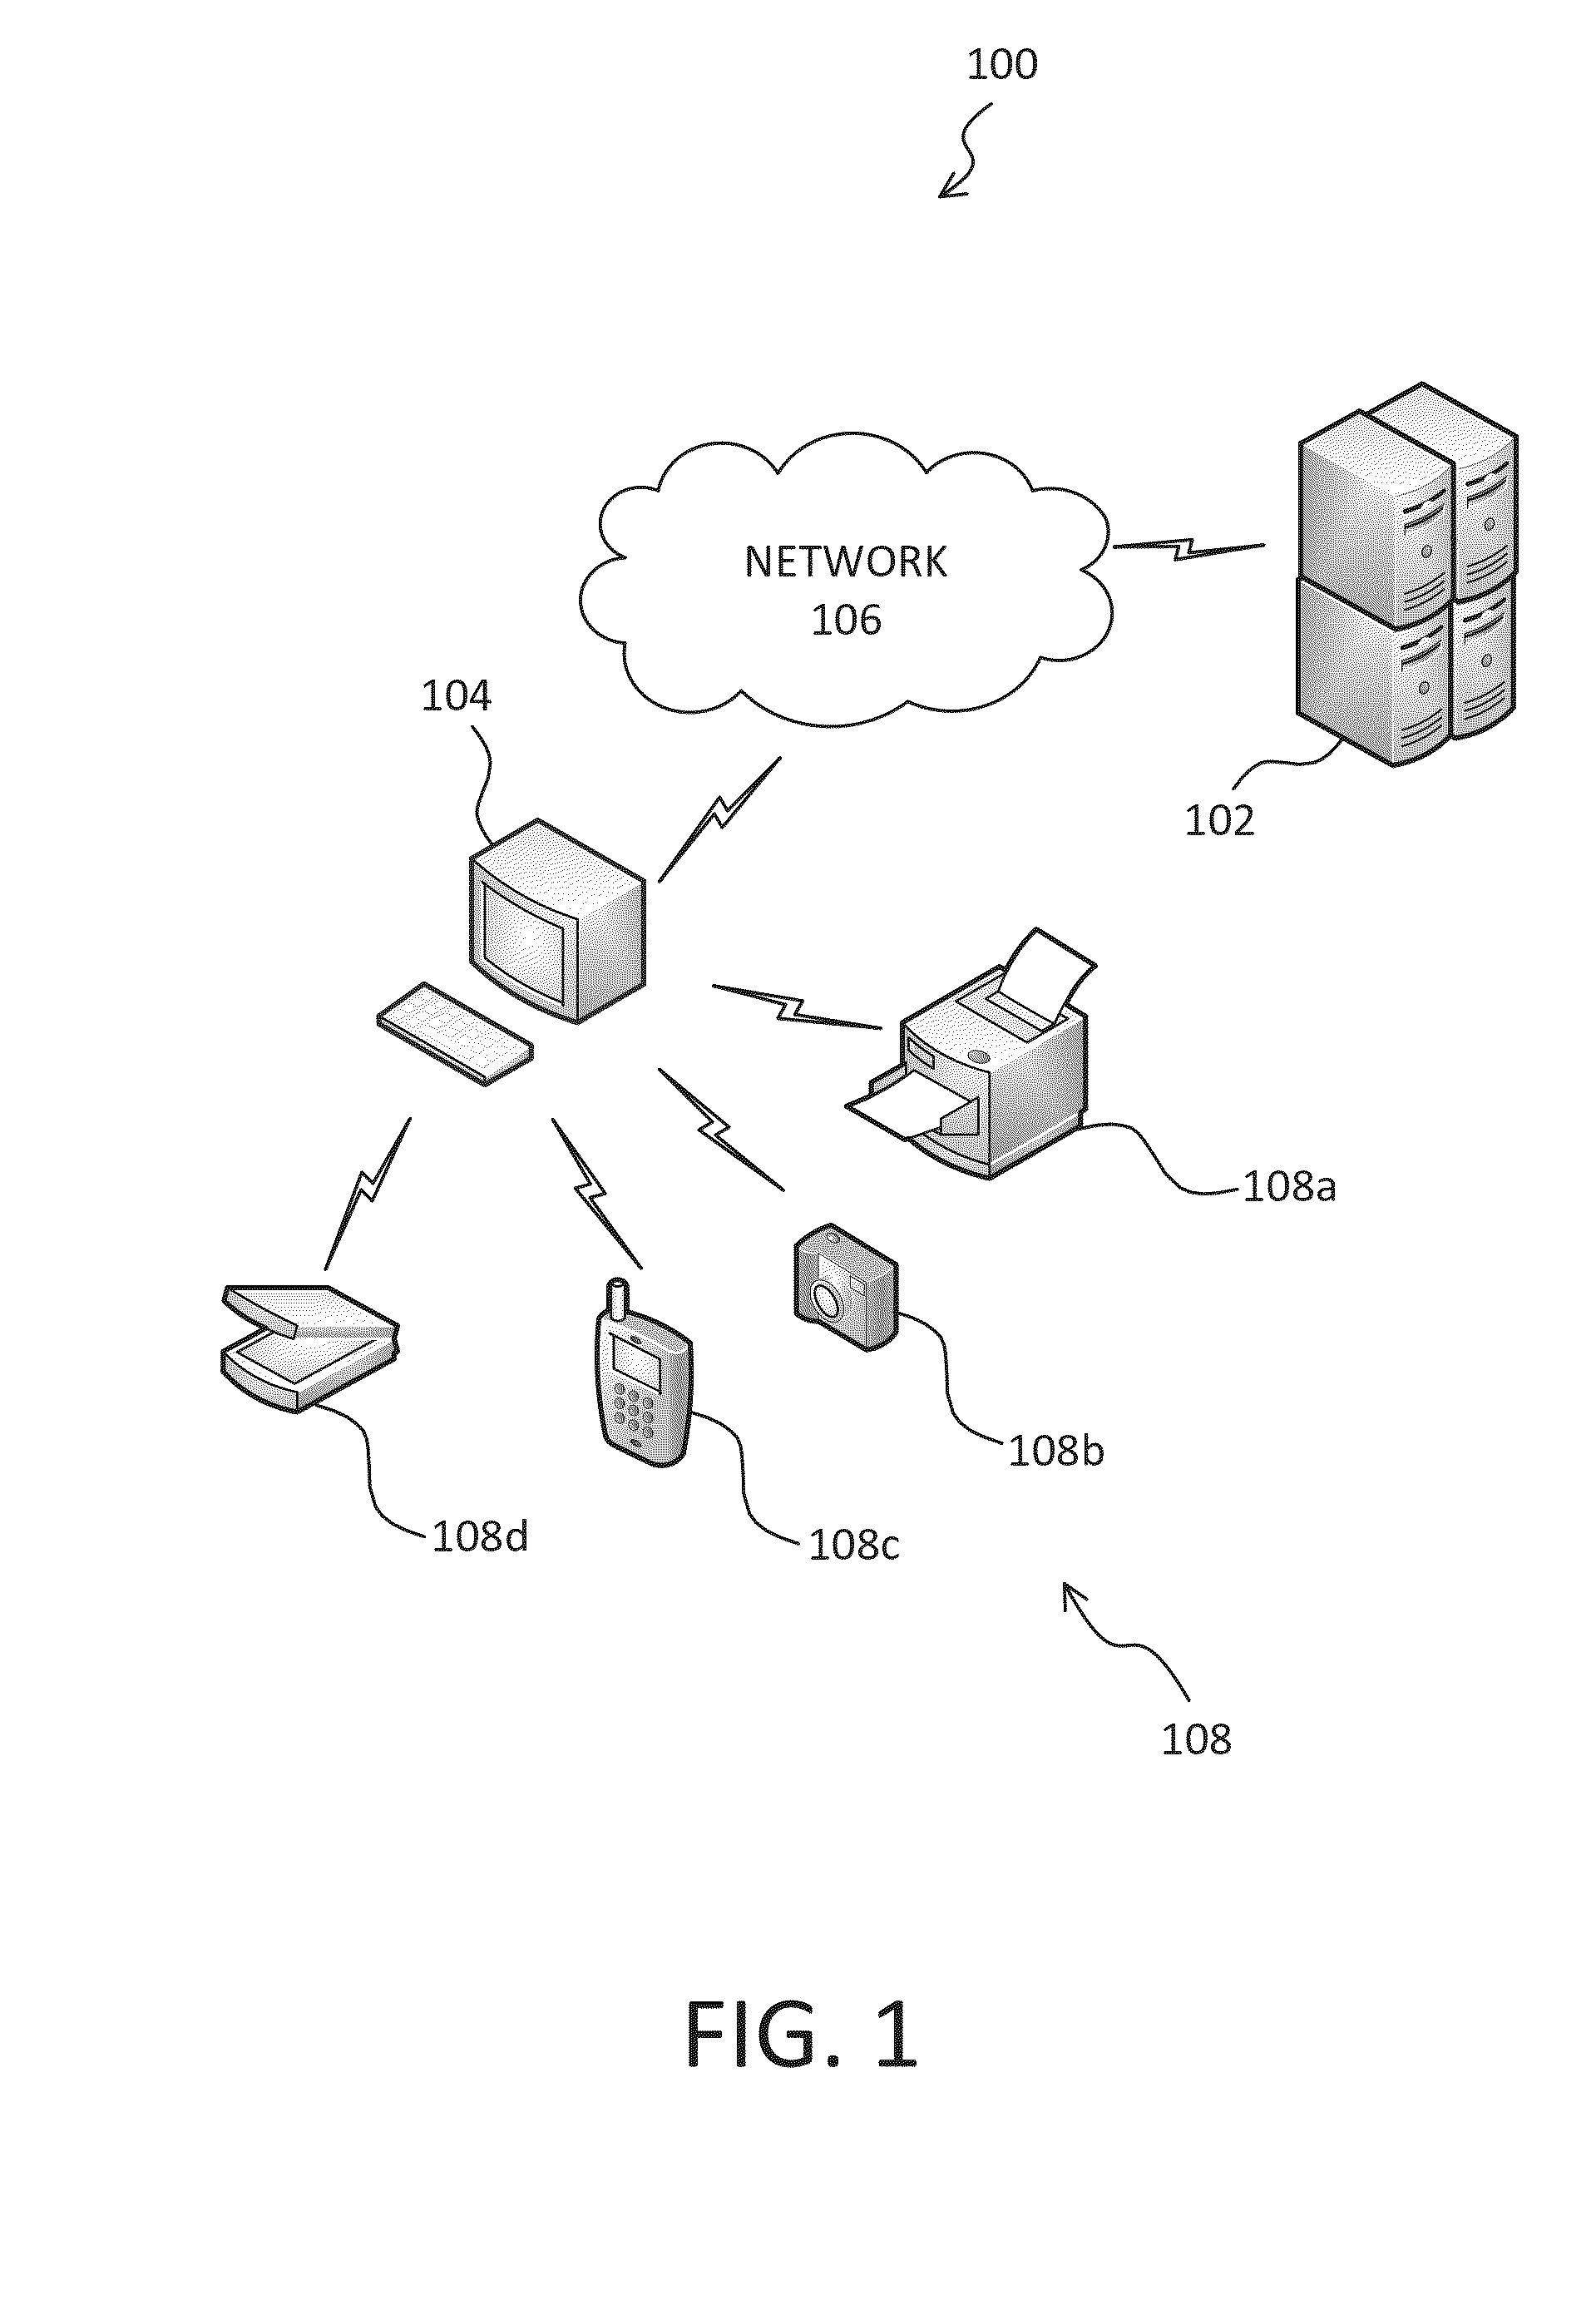 Registration and authentication of computing devices using a digital skeleton key